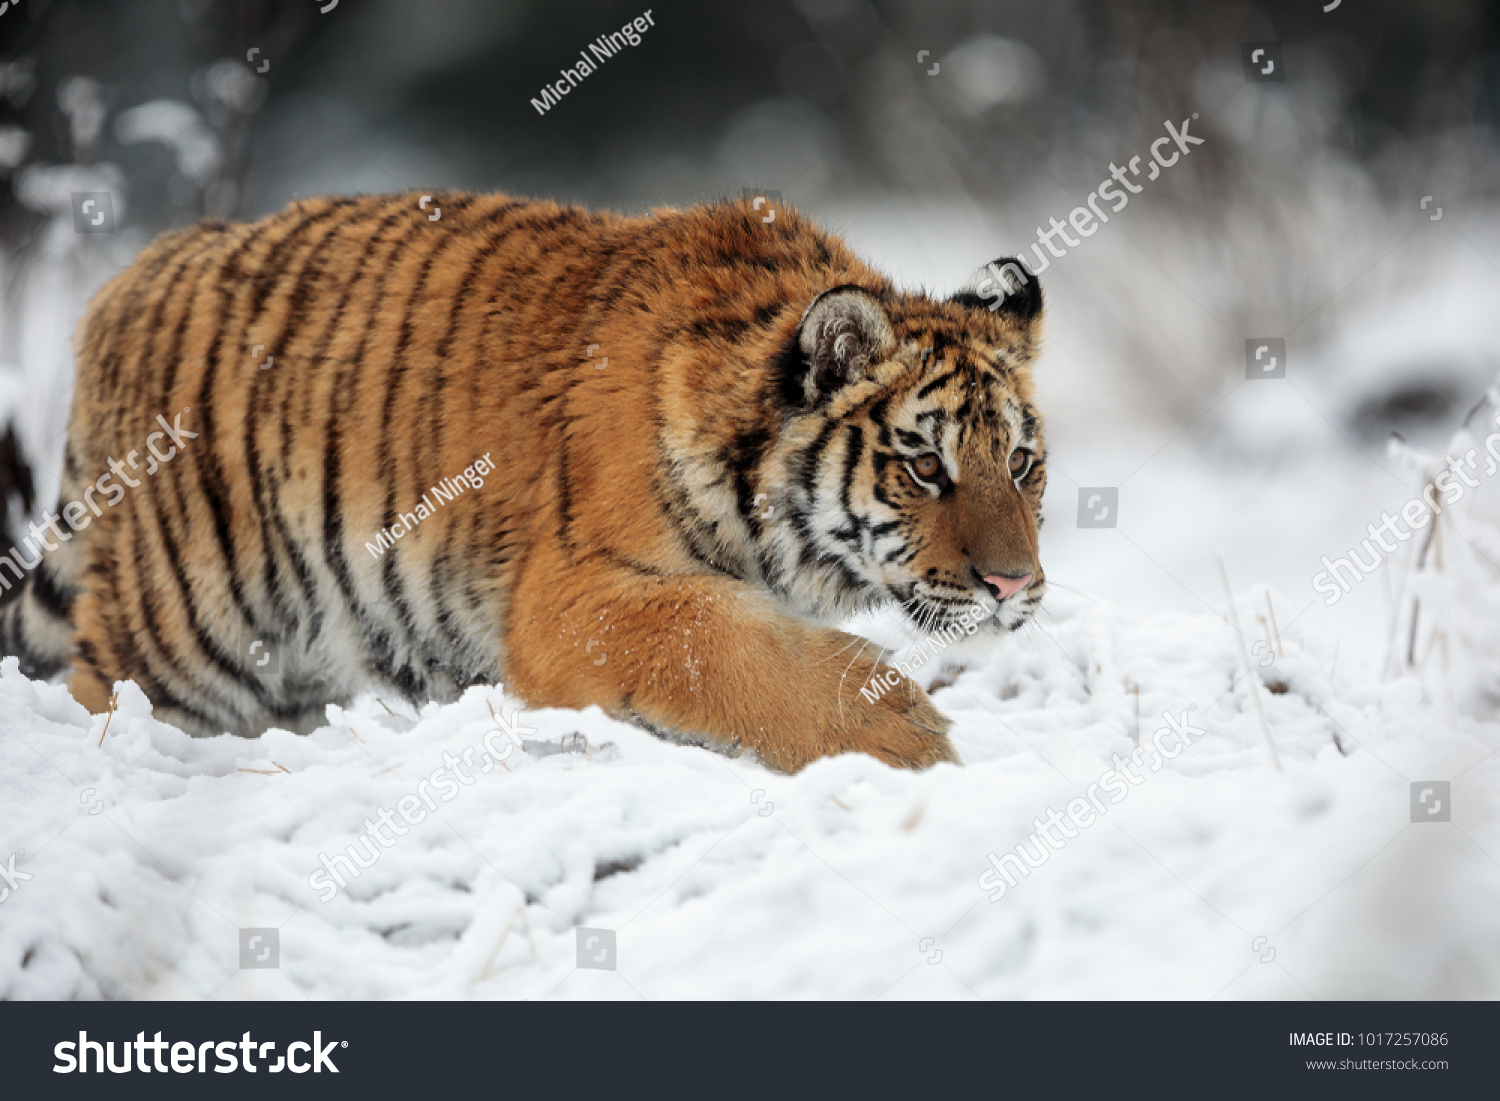 Siberian tiger creeps through the deep snow of the snowy landscape behind the prey #1017257086